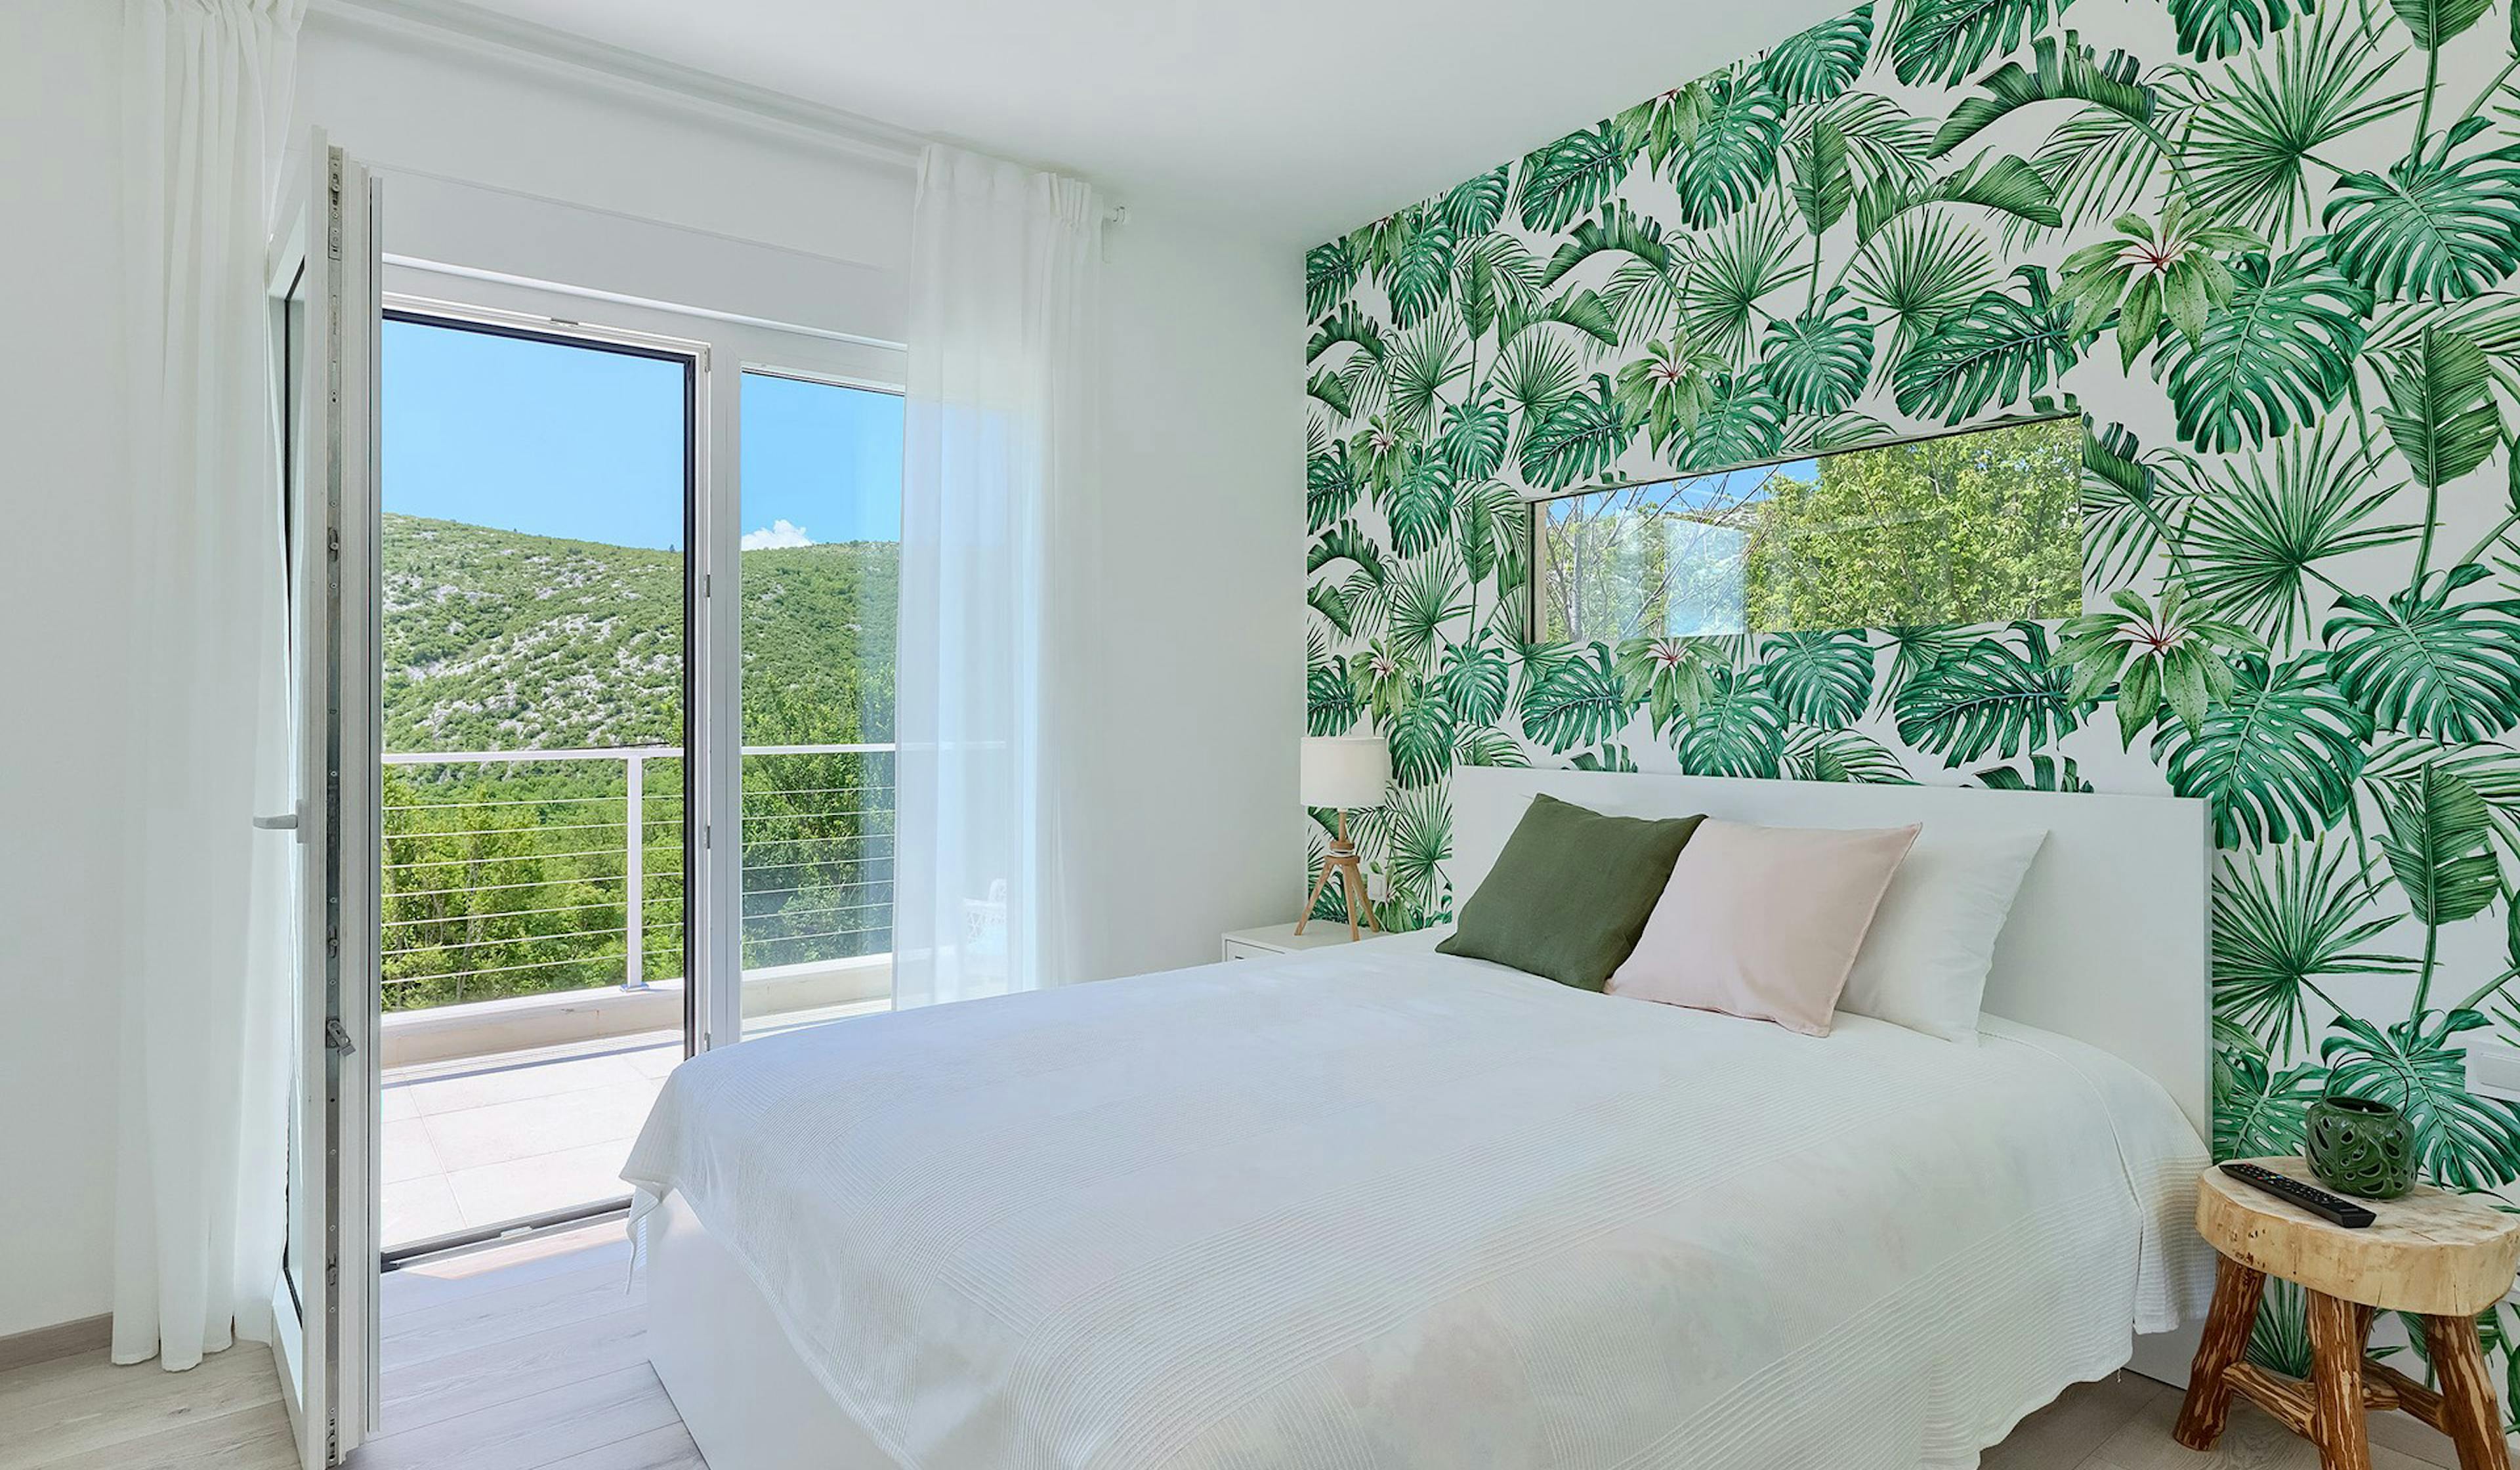 Tranquil villa bedroom with a private pool vista.